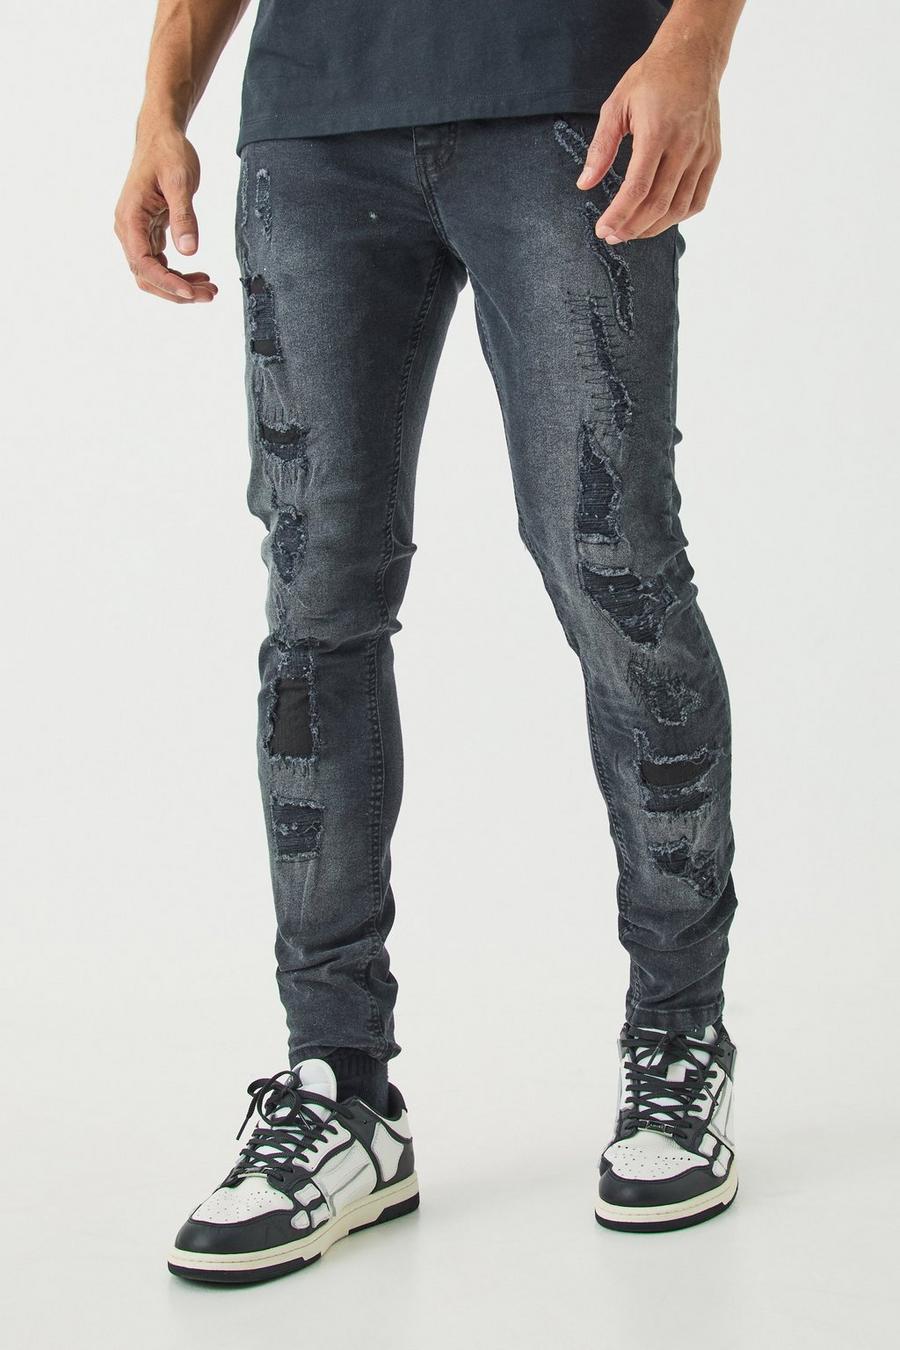 Jeans Skinny Fit Stretch neri con strappi all over, Washed black